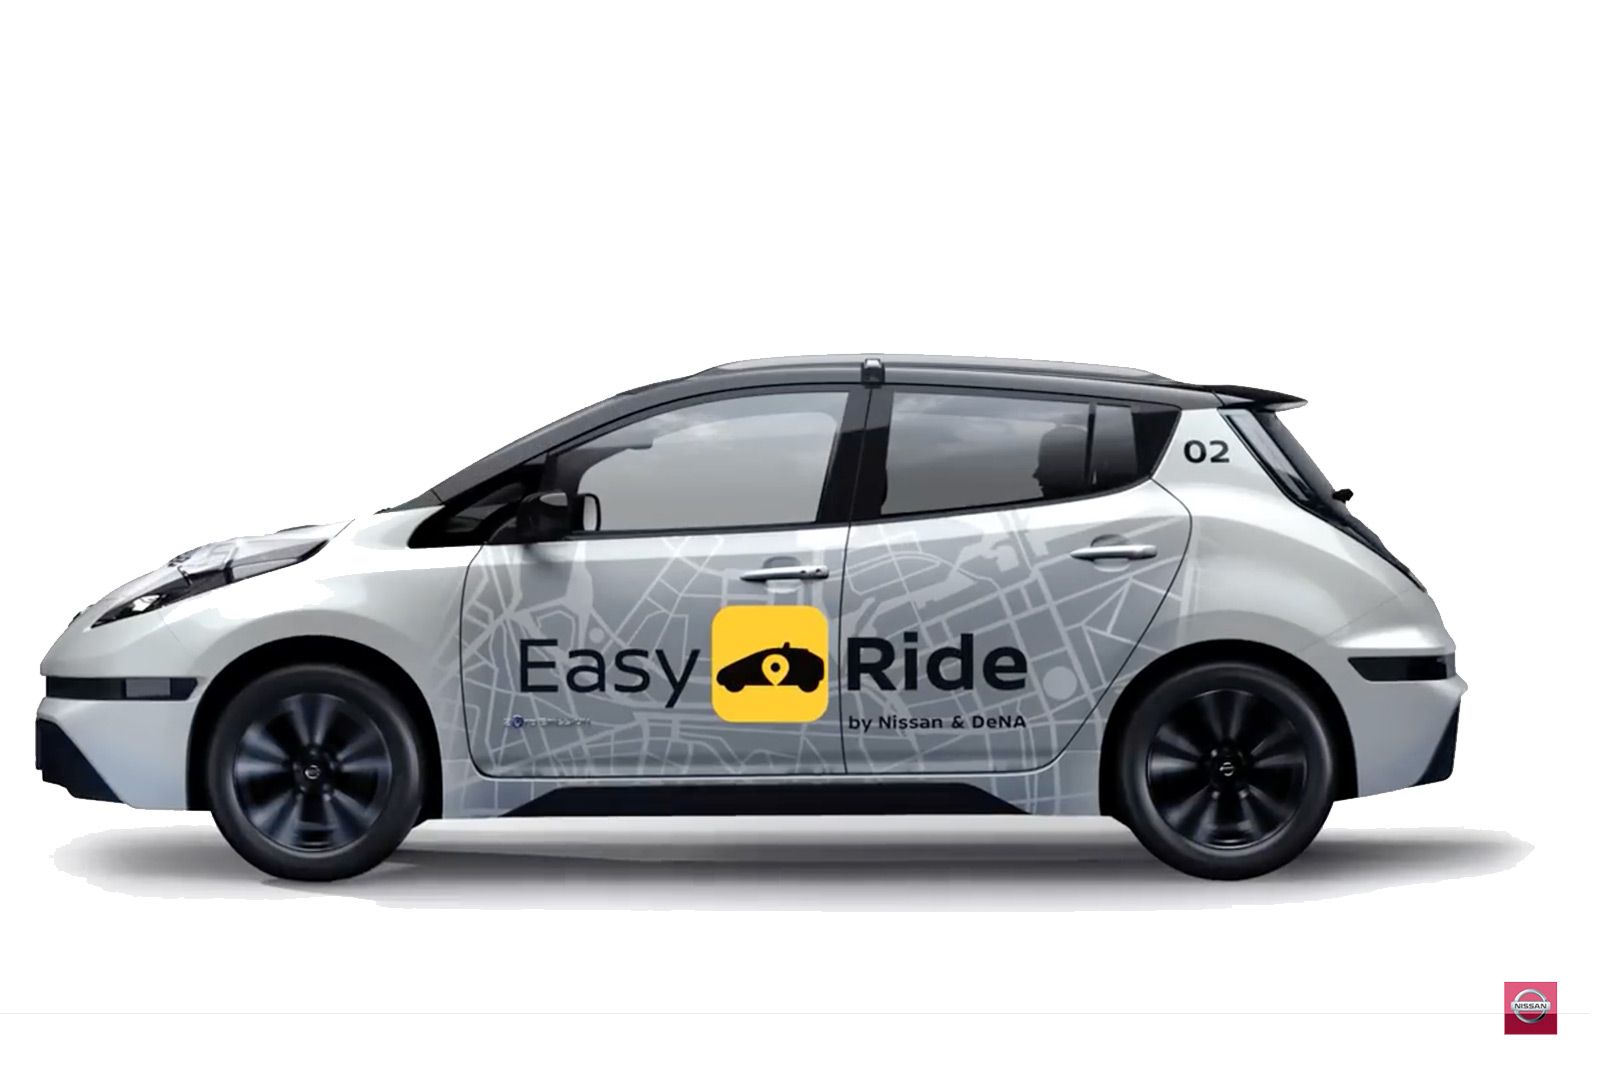 Nissan to test self-driving taxis in Japan in 2018 full launch planned for 2020 Olympics image 1